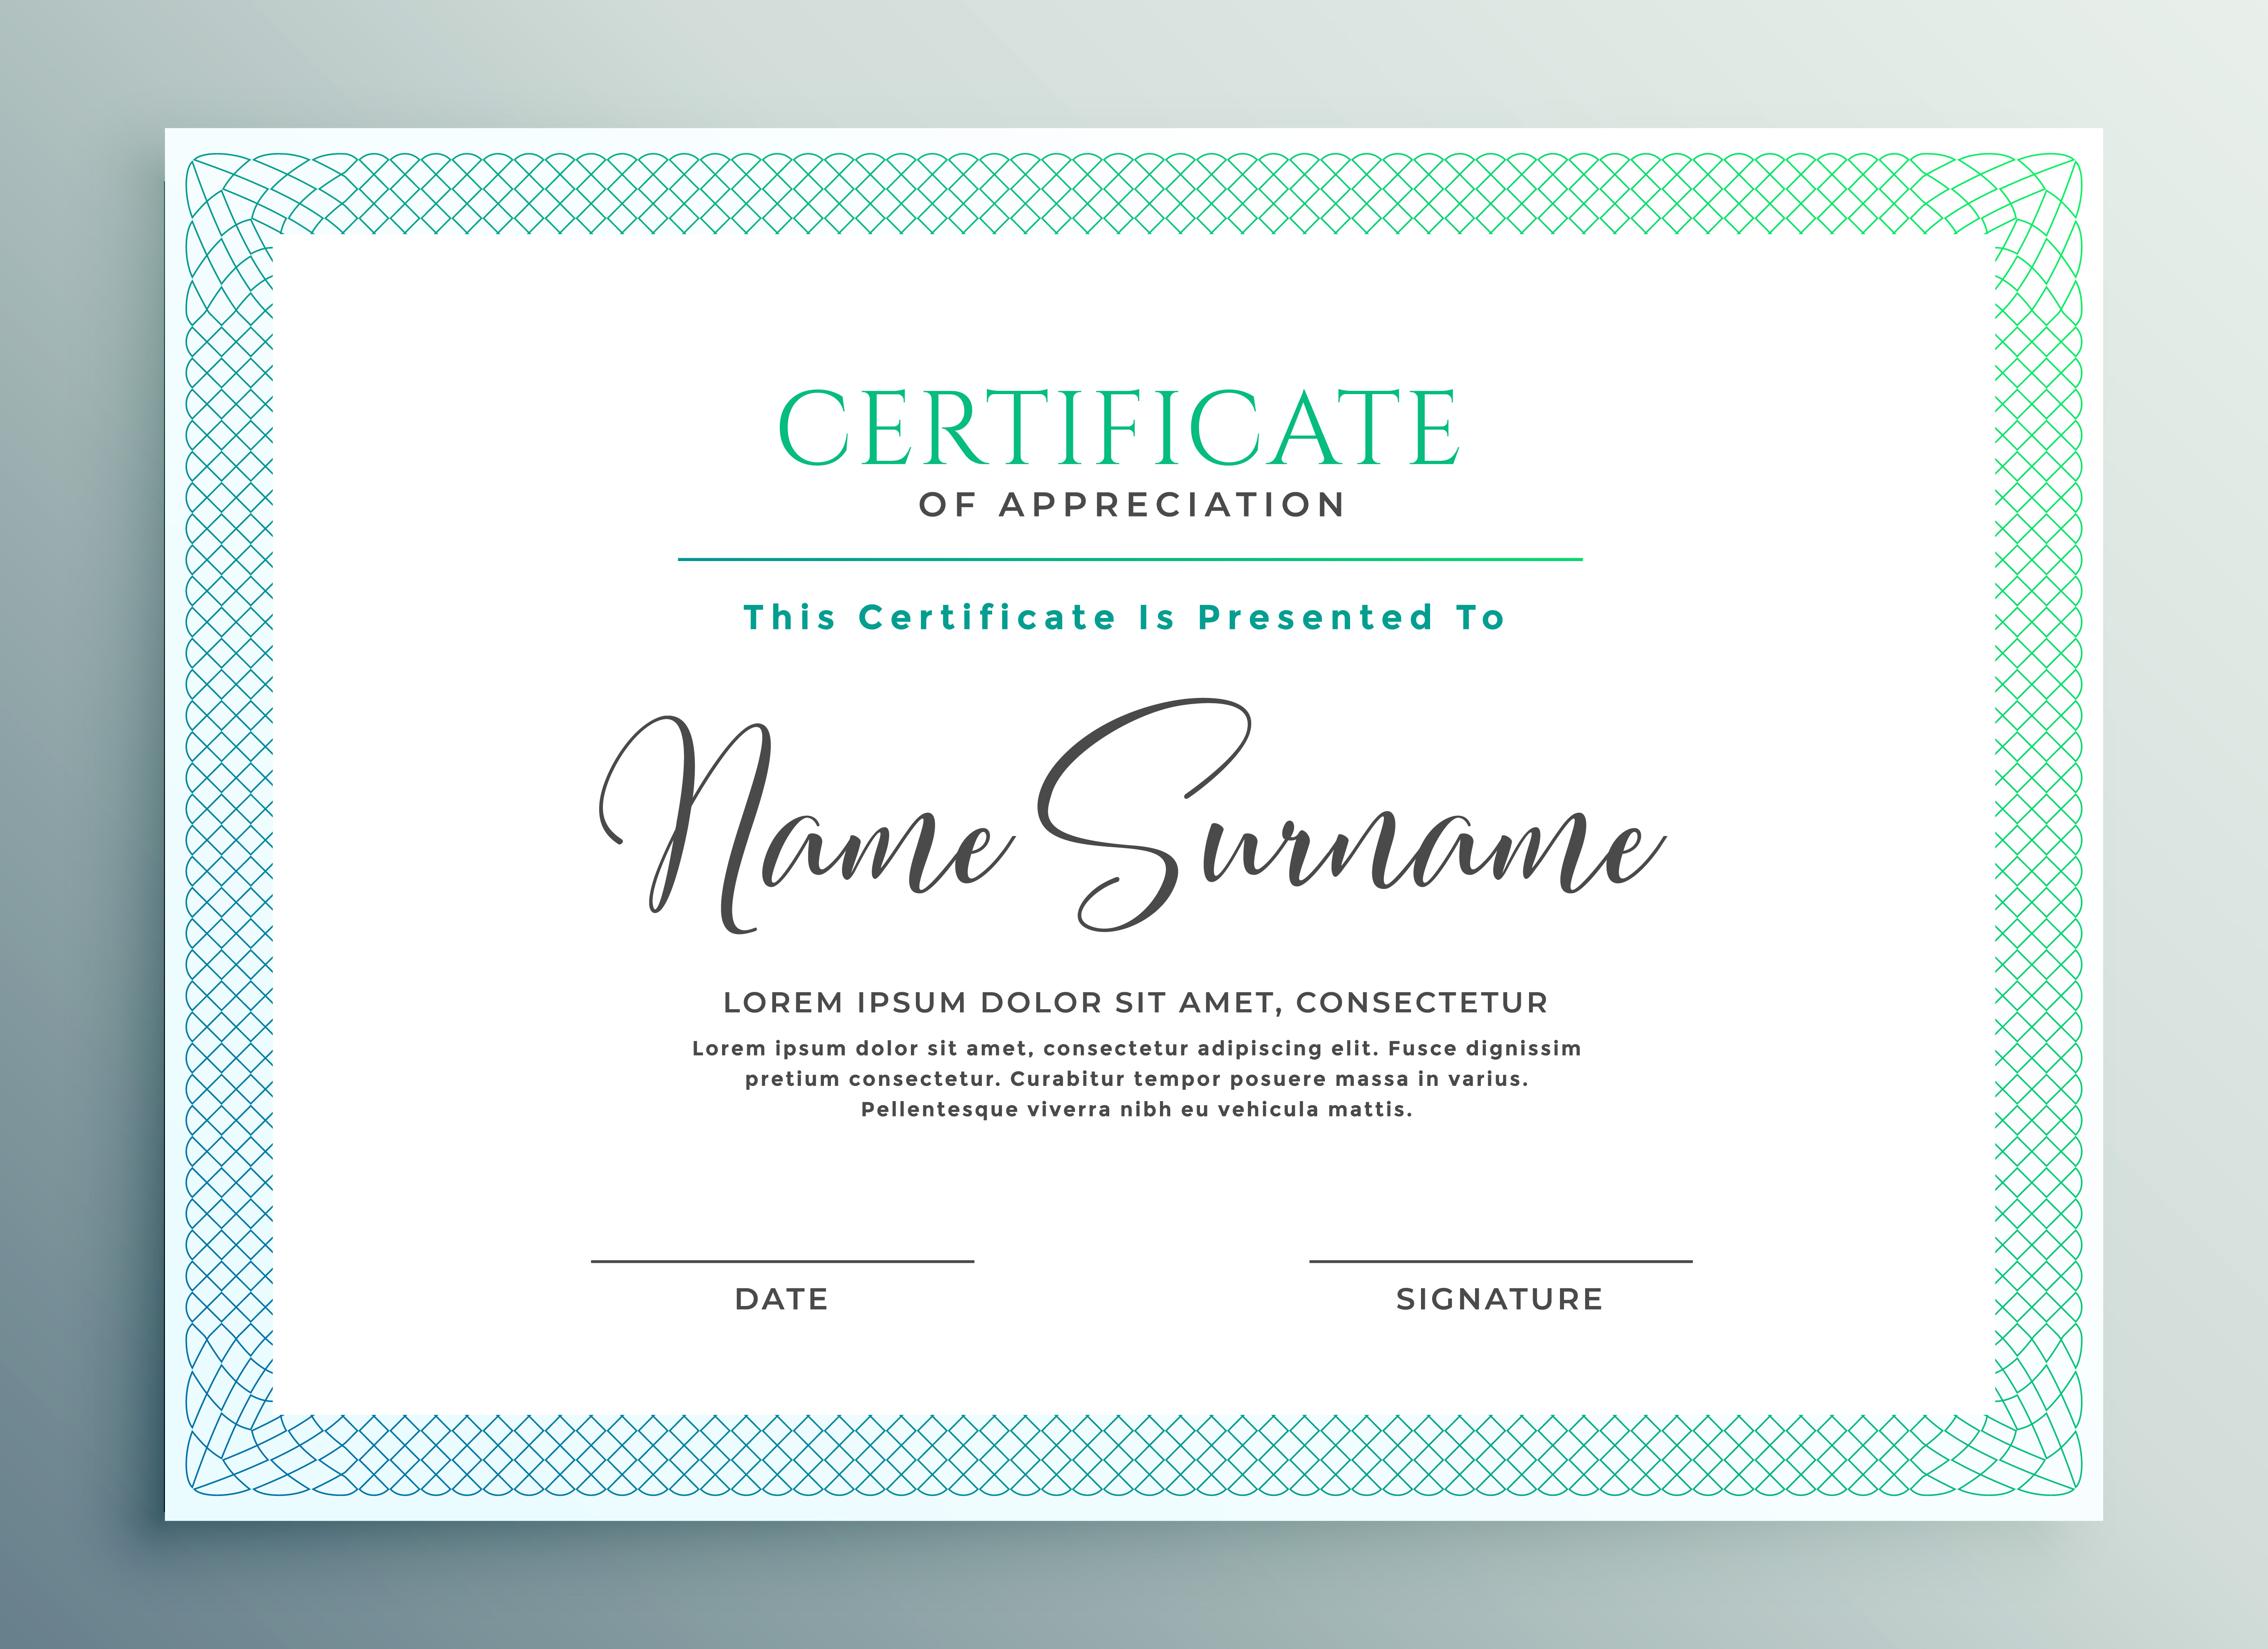 certificate-of-appreciation-template-design-download-free-vector-art-stock-graphics-images